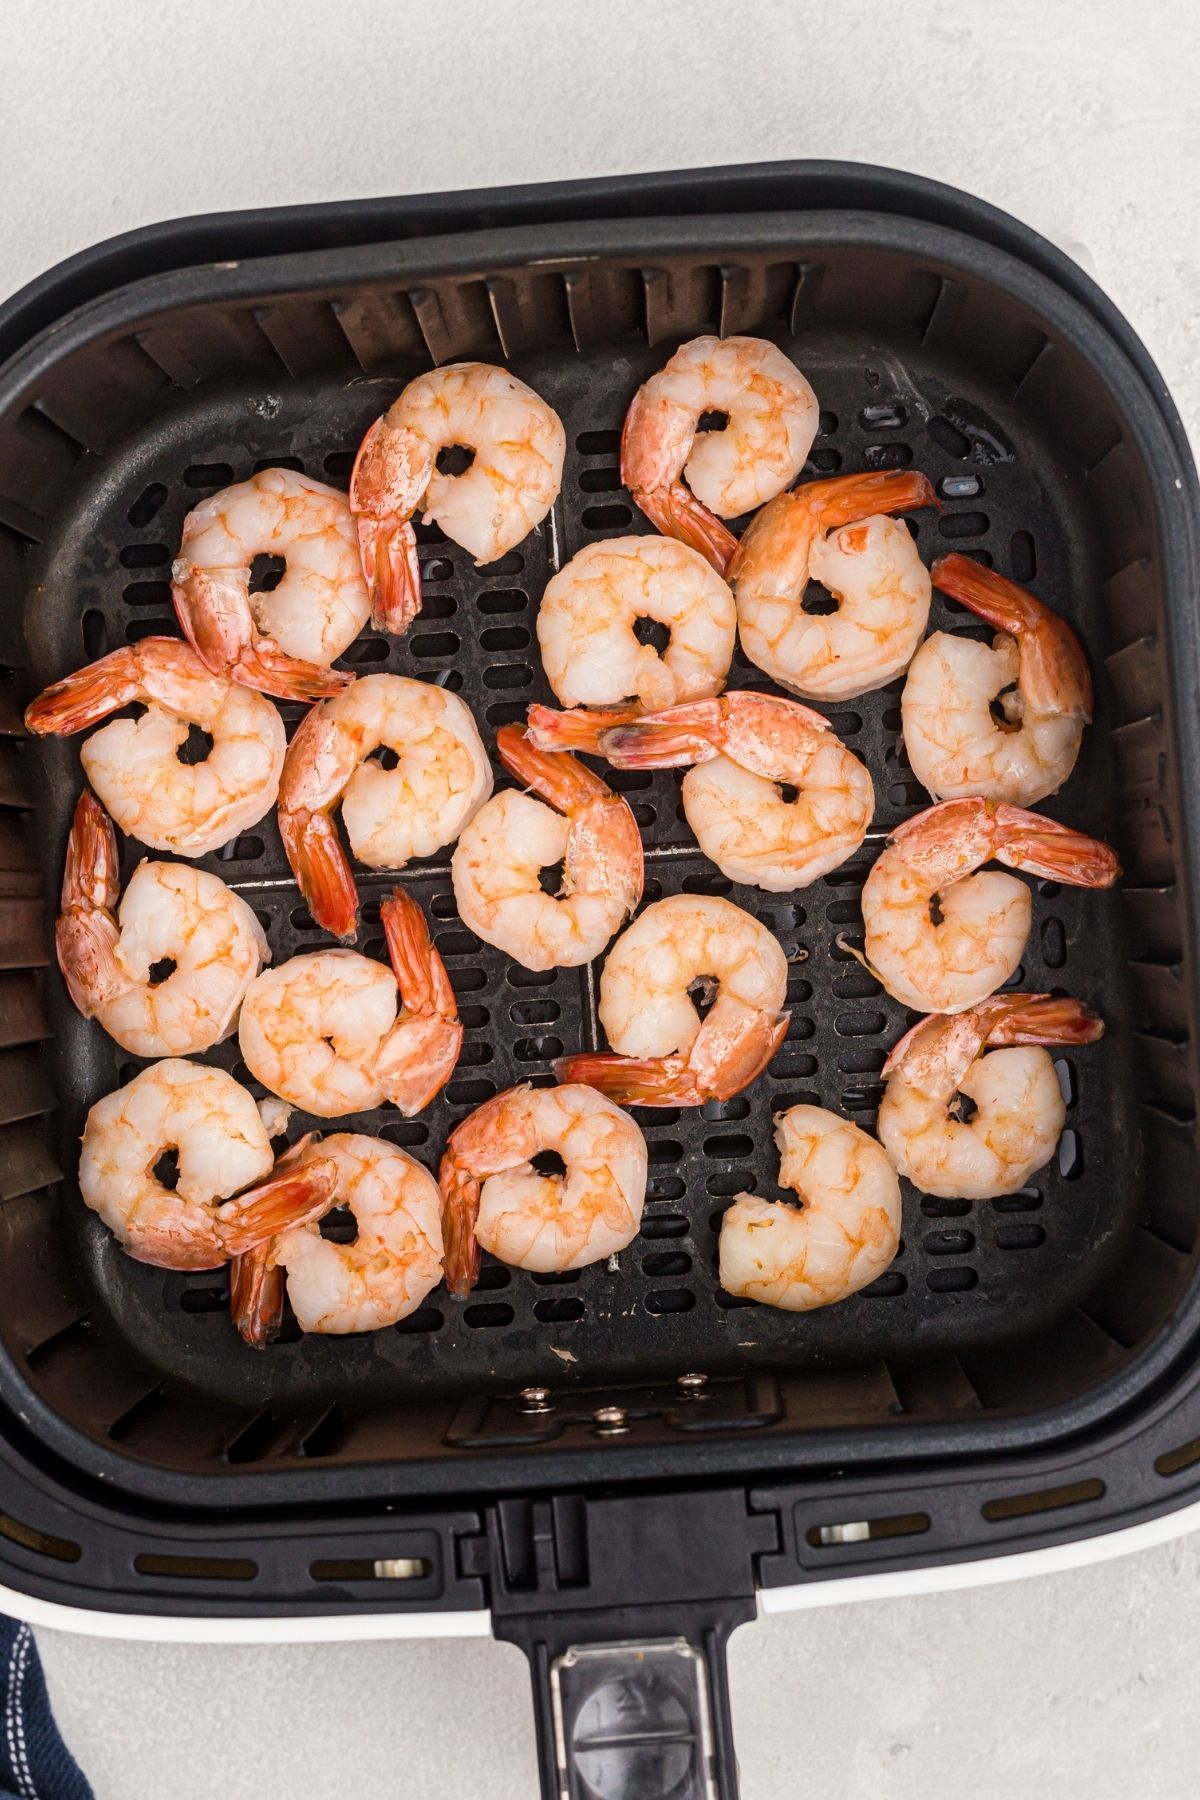 Orange frozen shrimp in the air fryer basket before being cooked